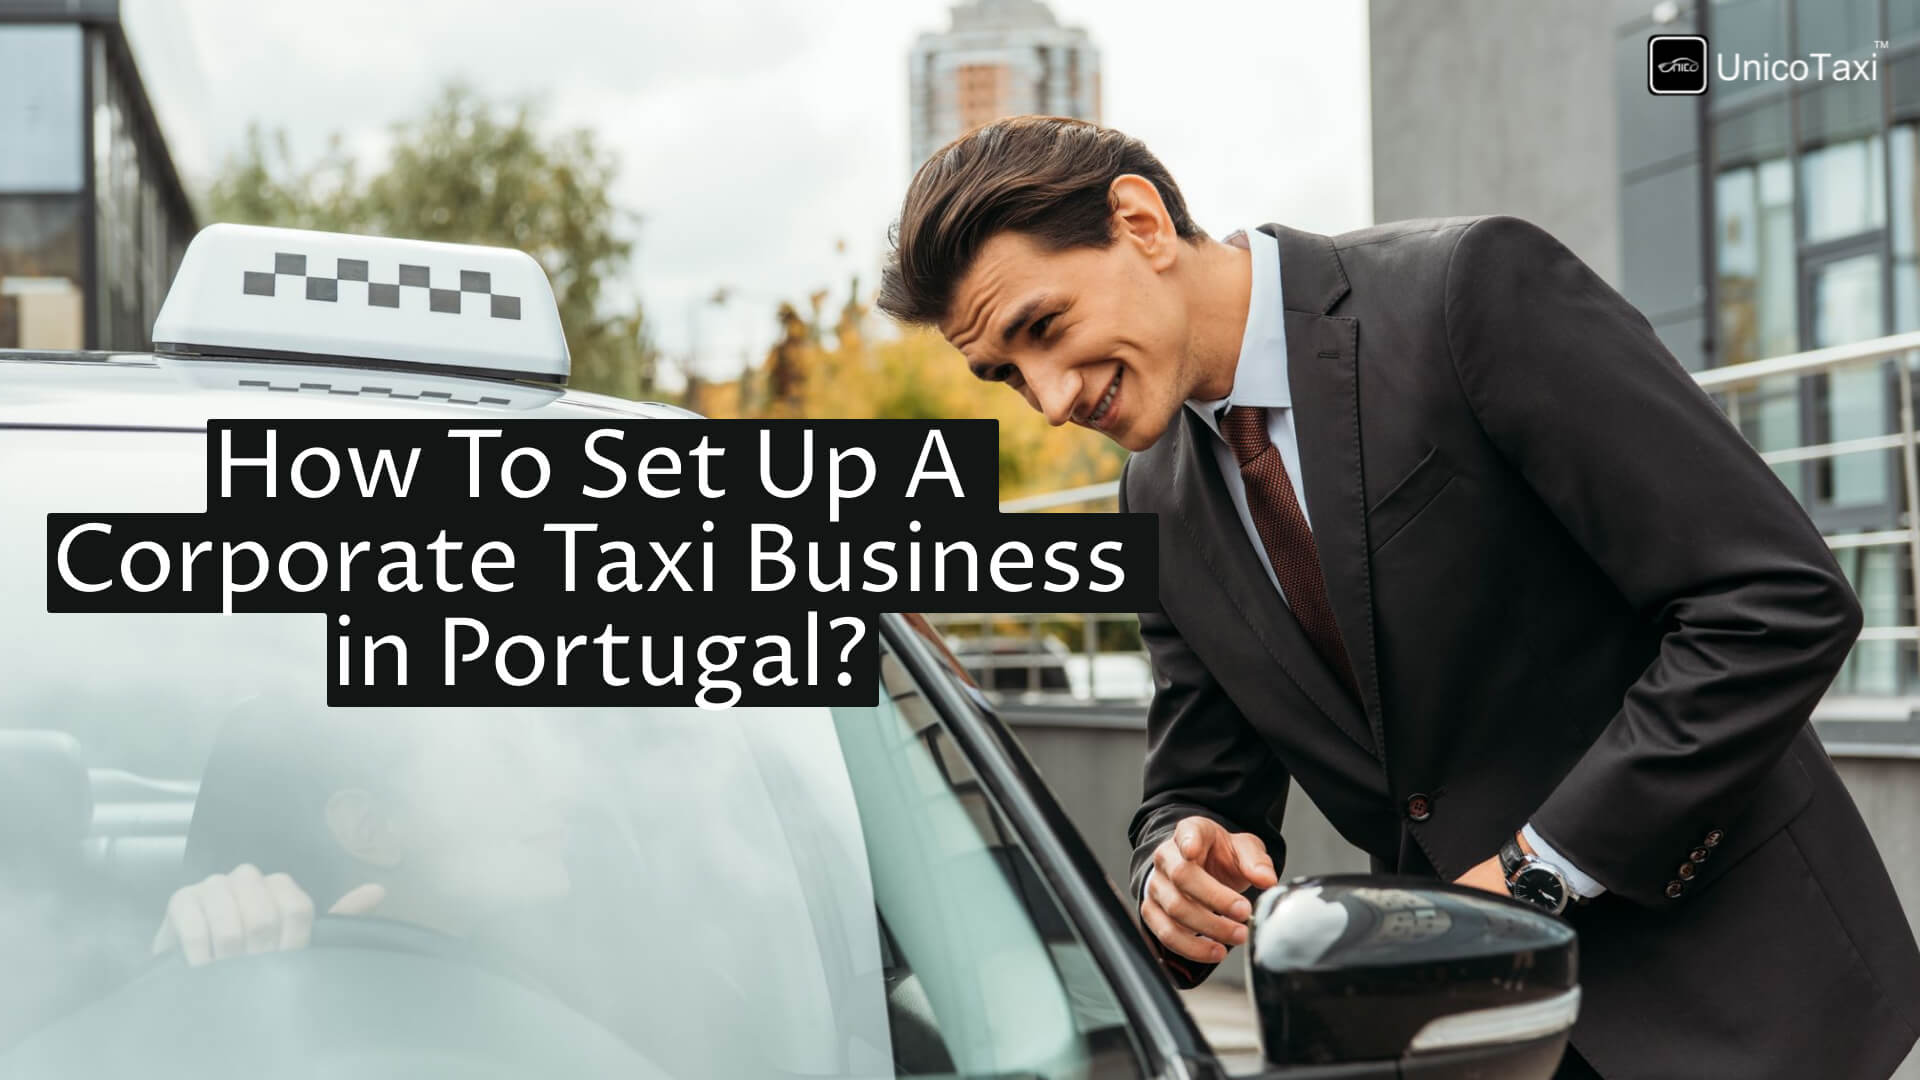 How to Set Up a Corporate Taxi Business in Portugal?